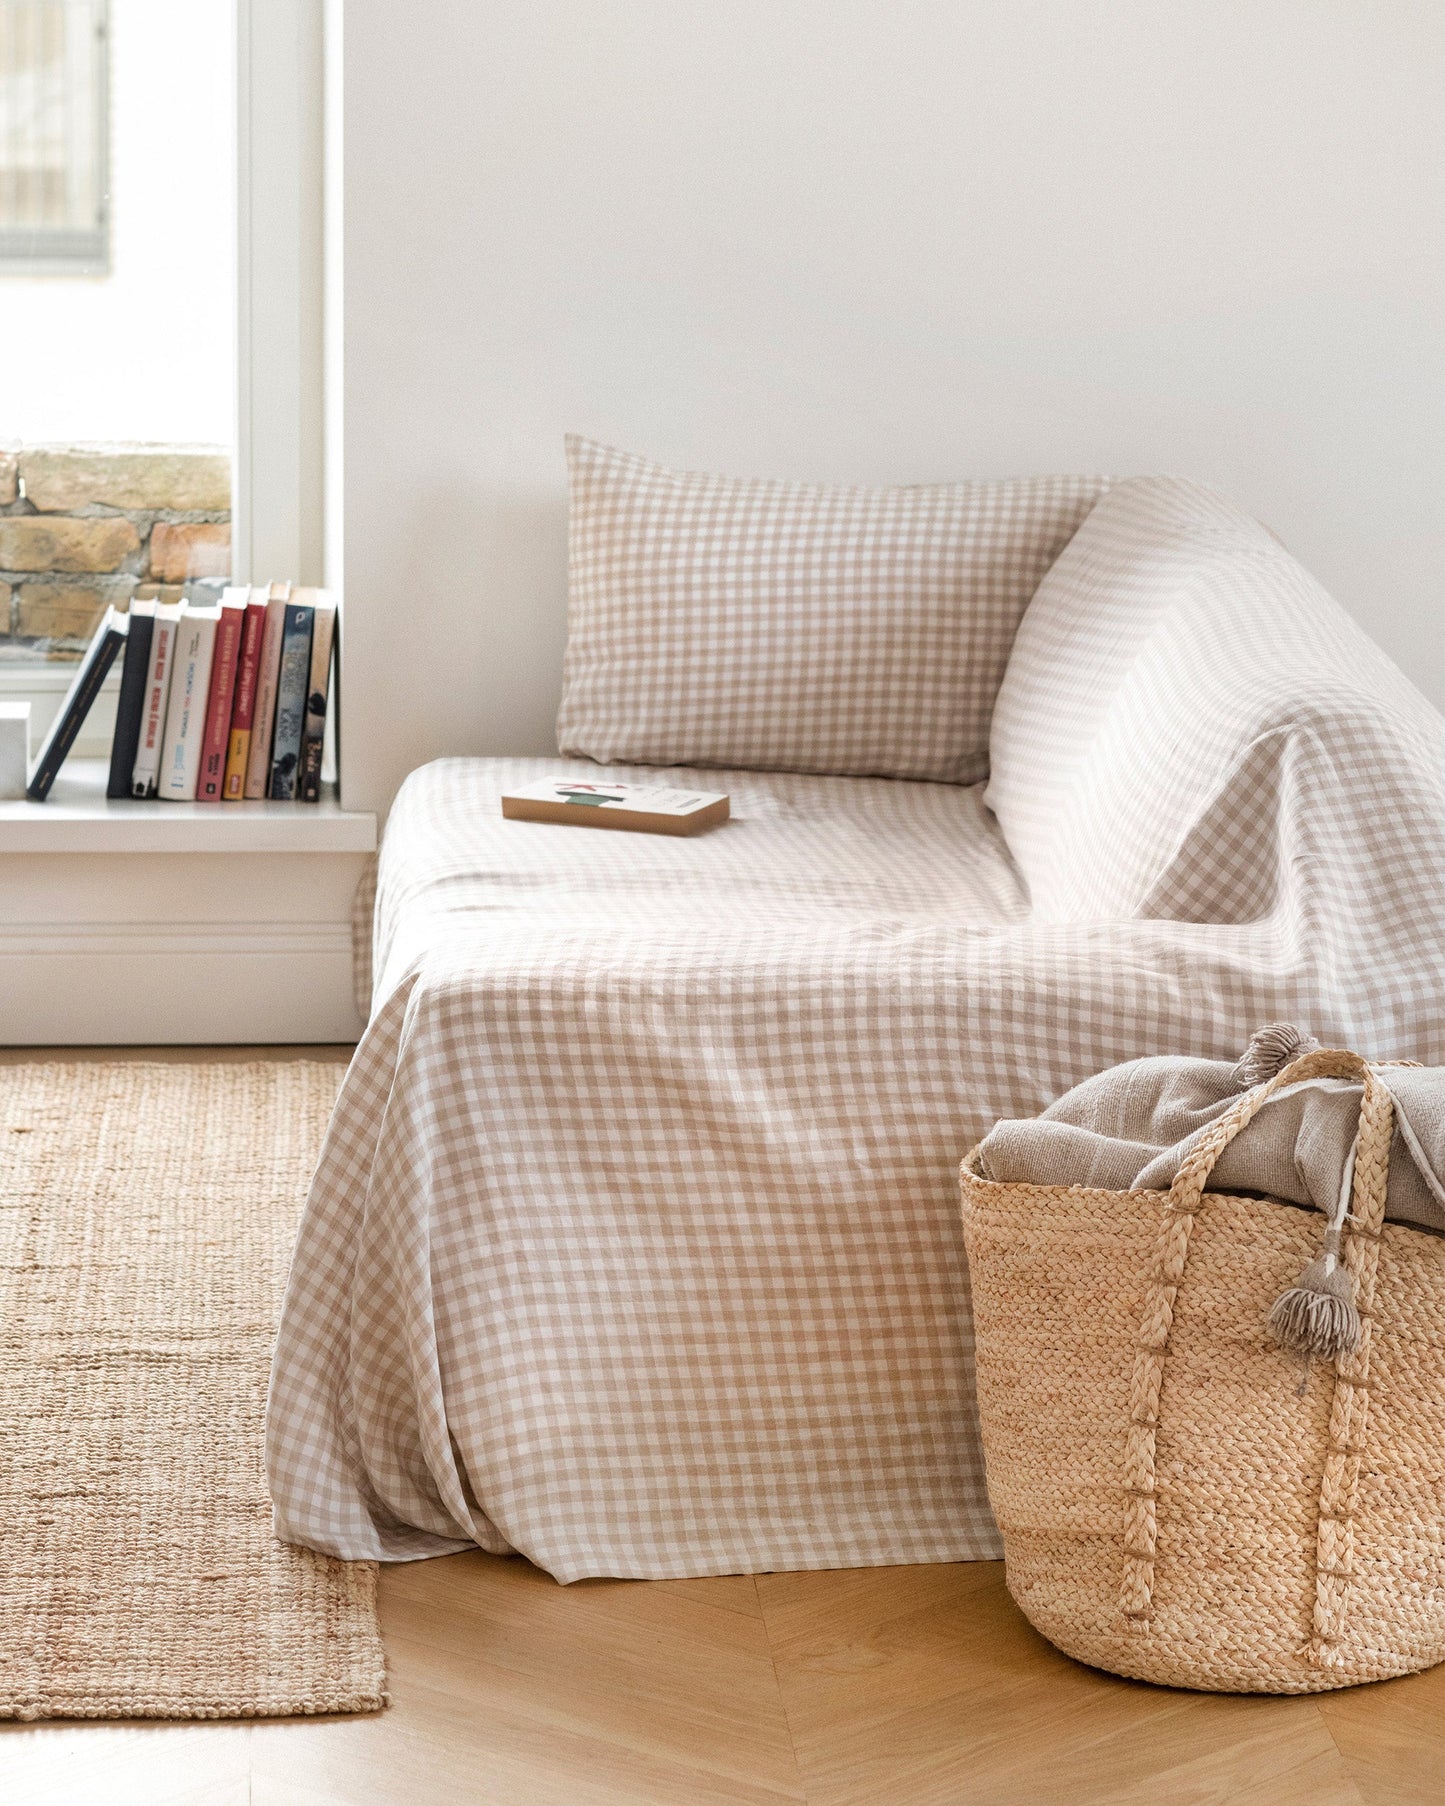 Custom size linen couch cover in Natural gingham - MagicLinen